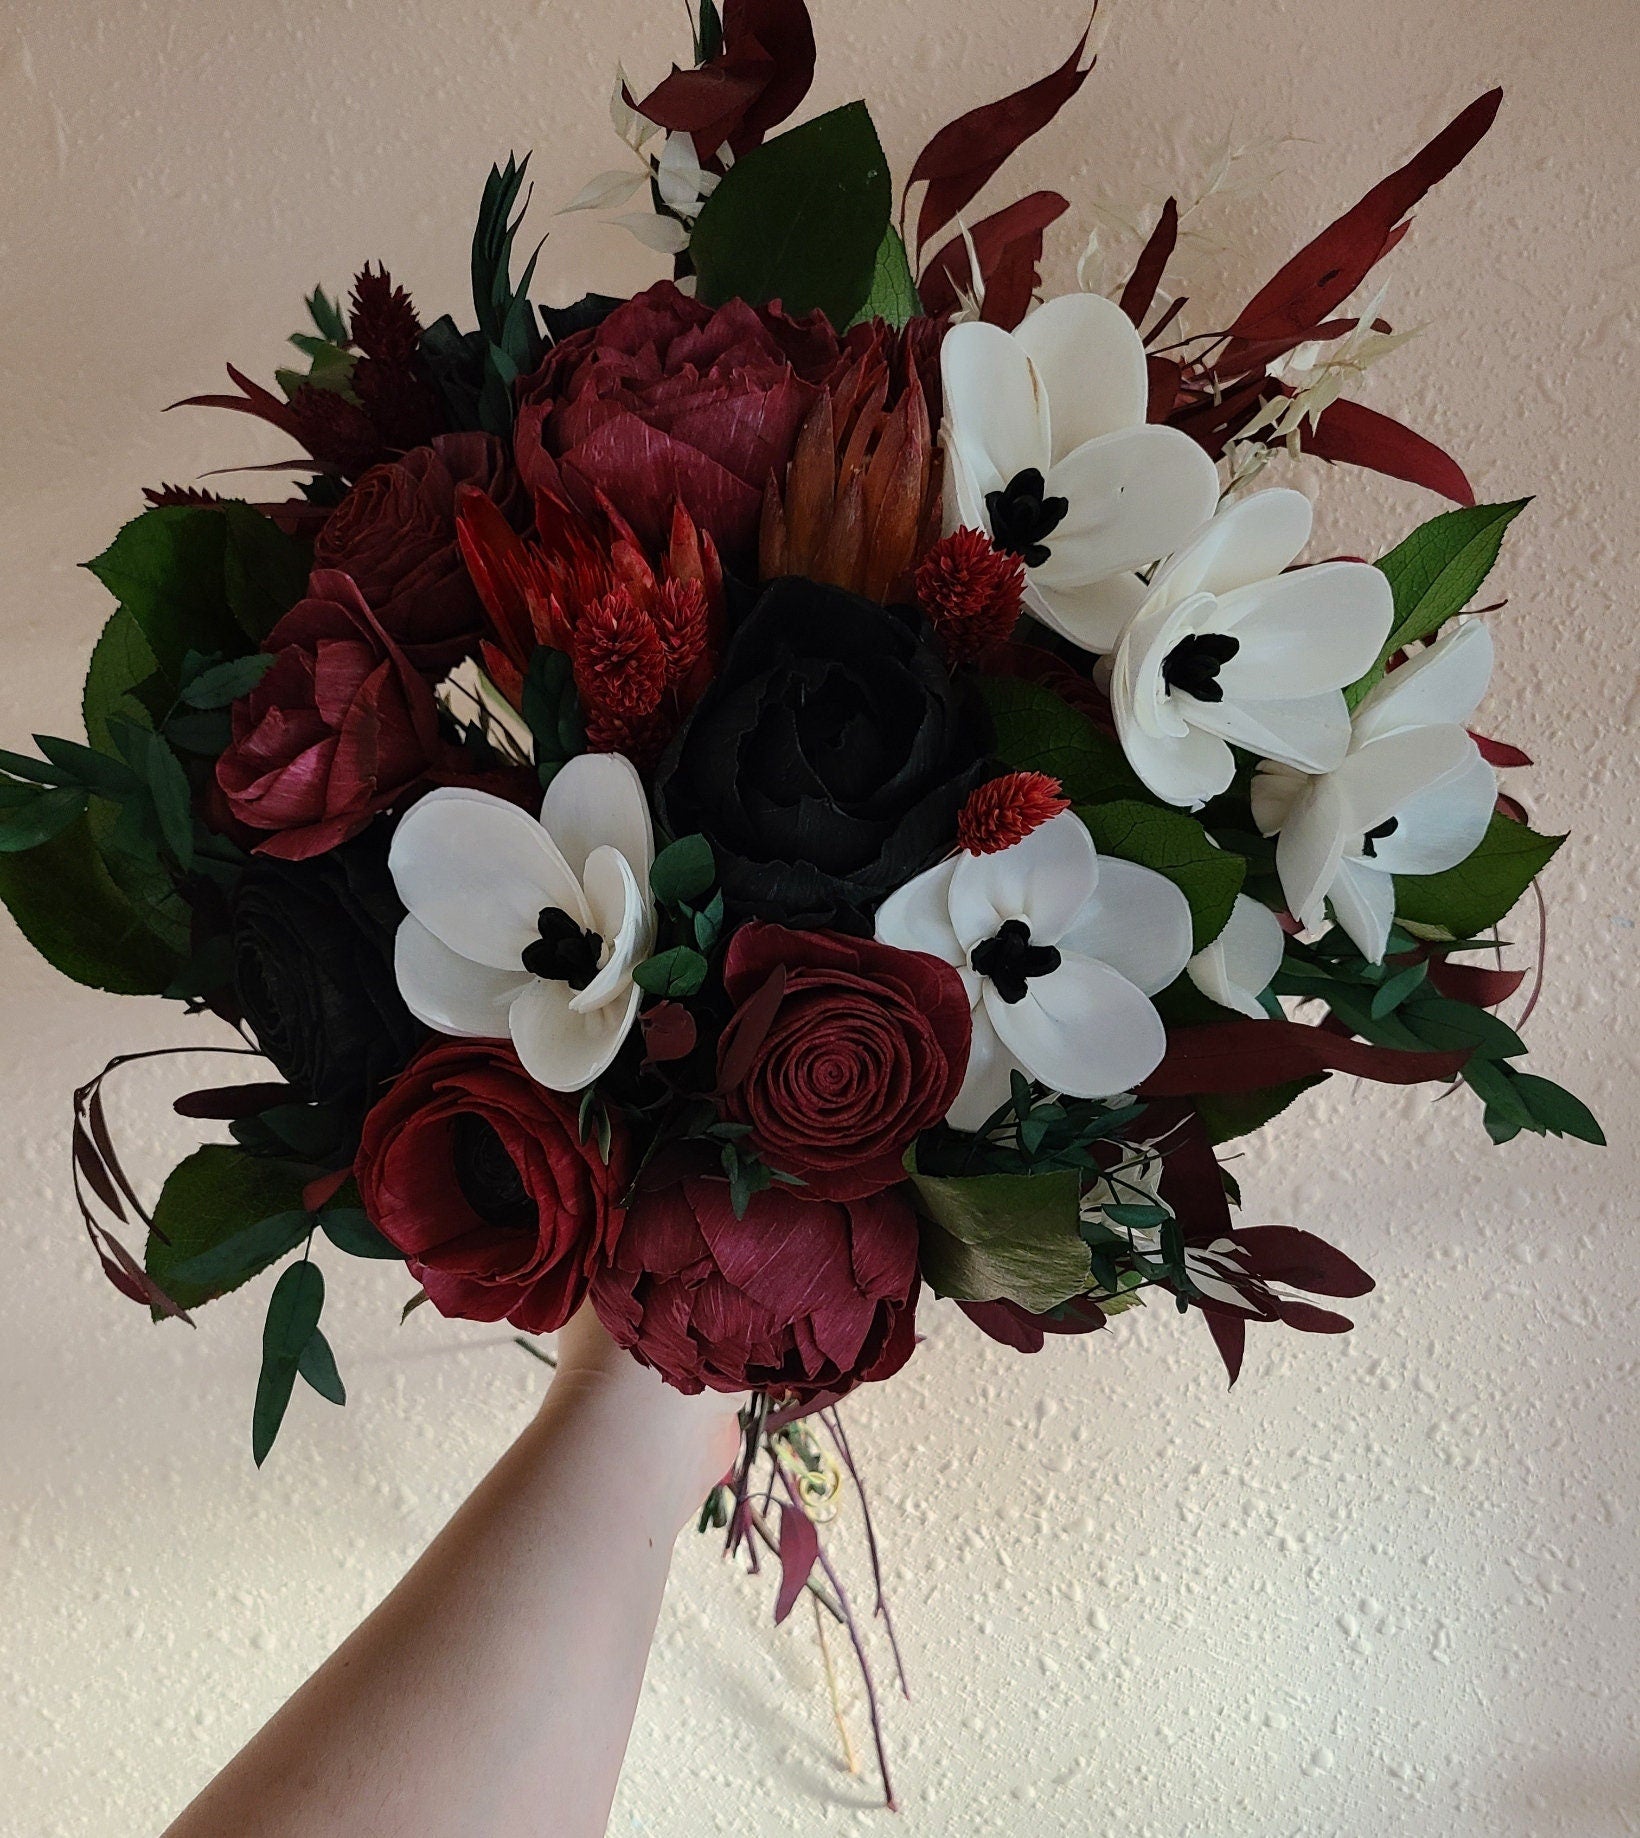 Burgundy and Black Orchid Bouquet